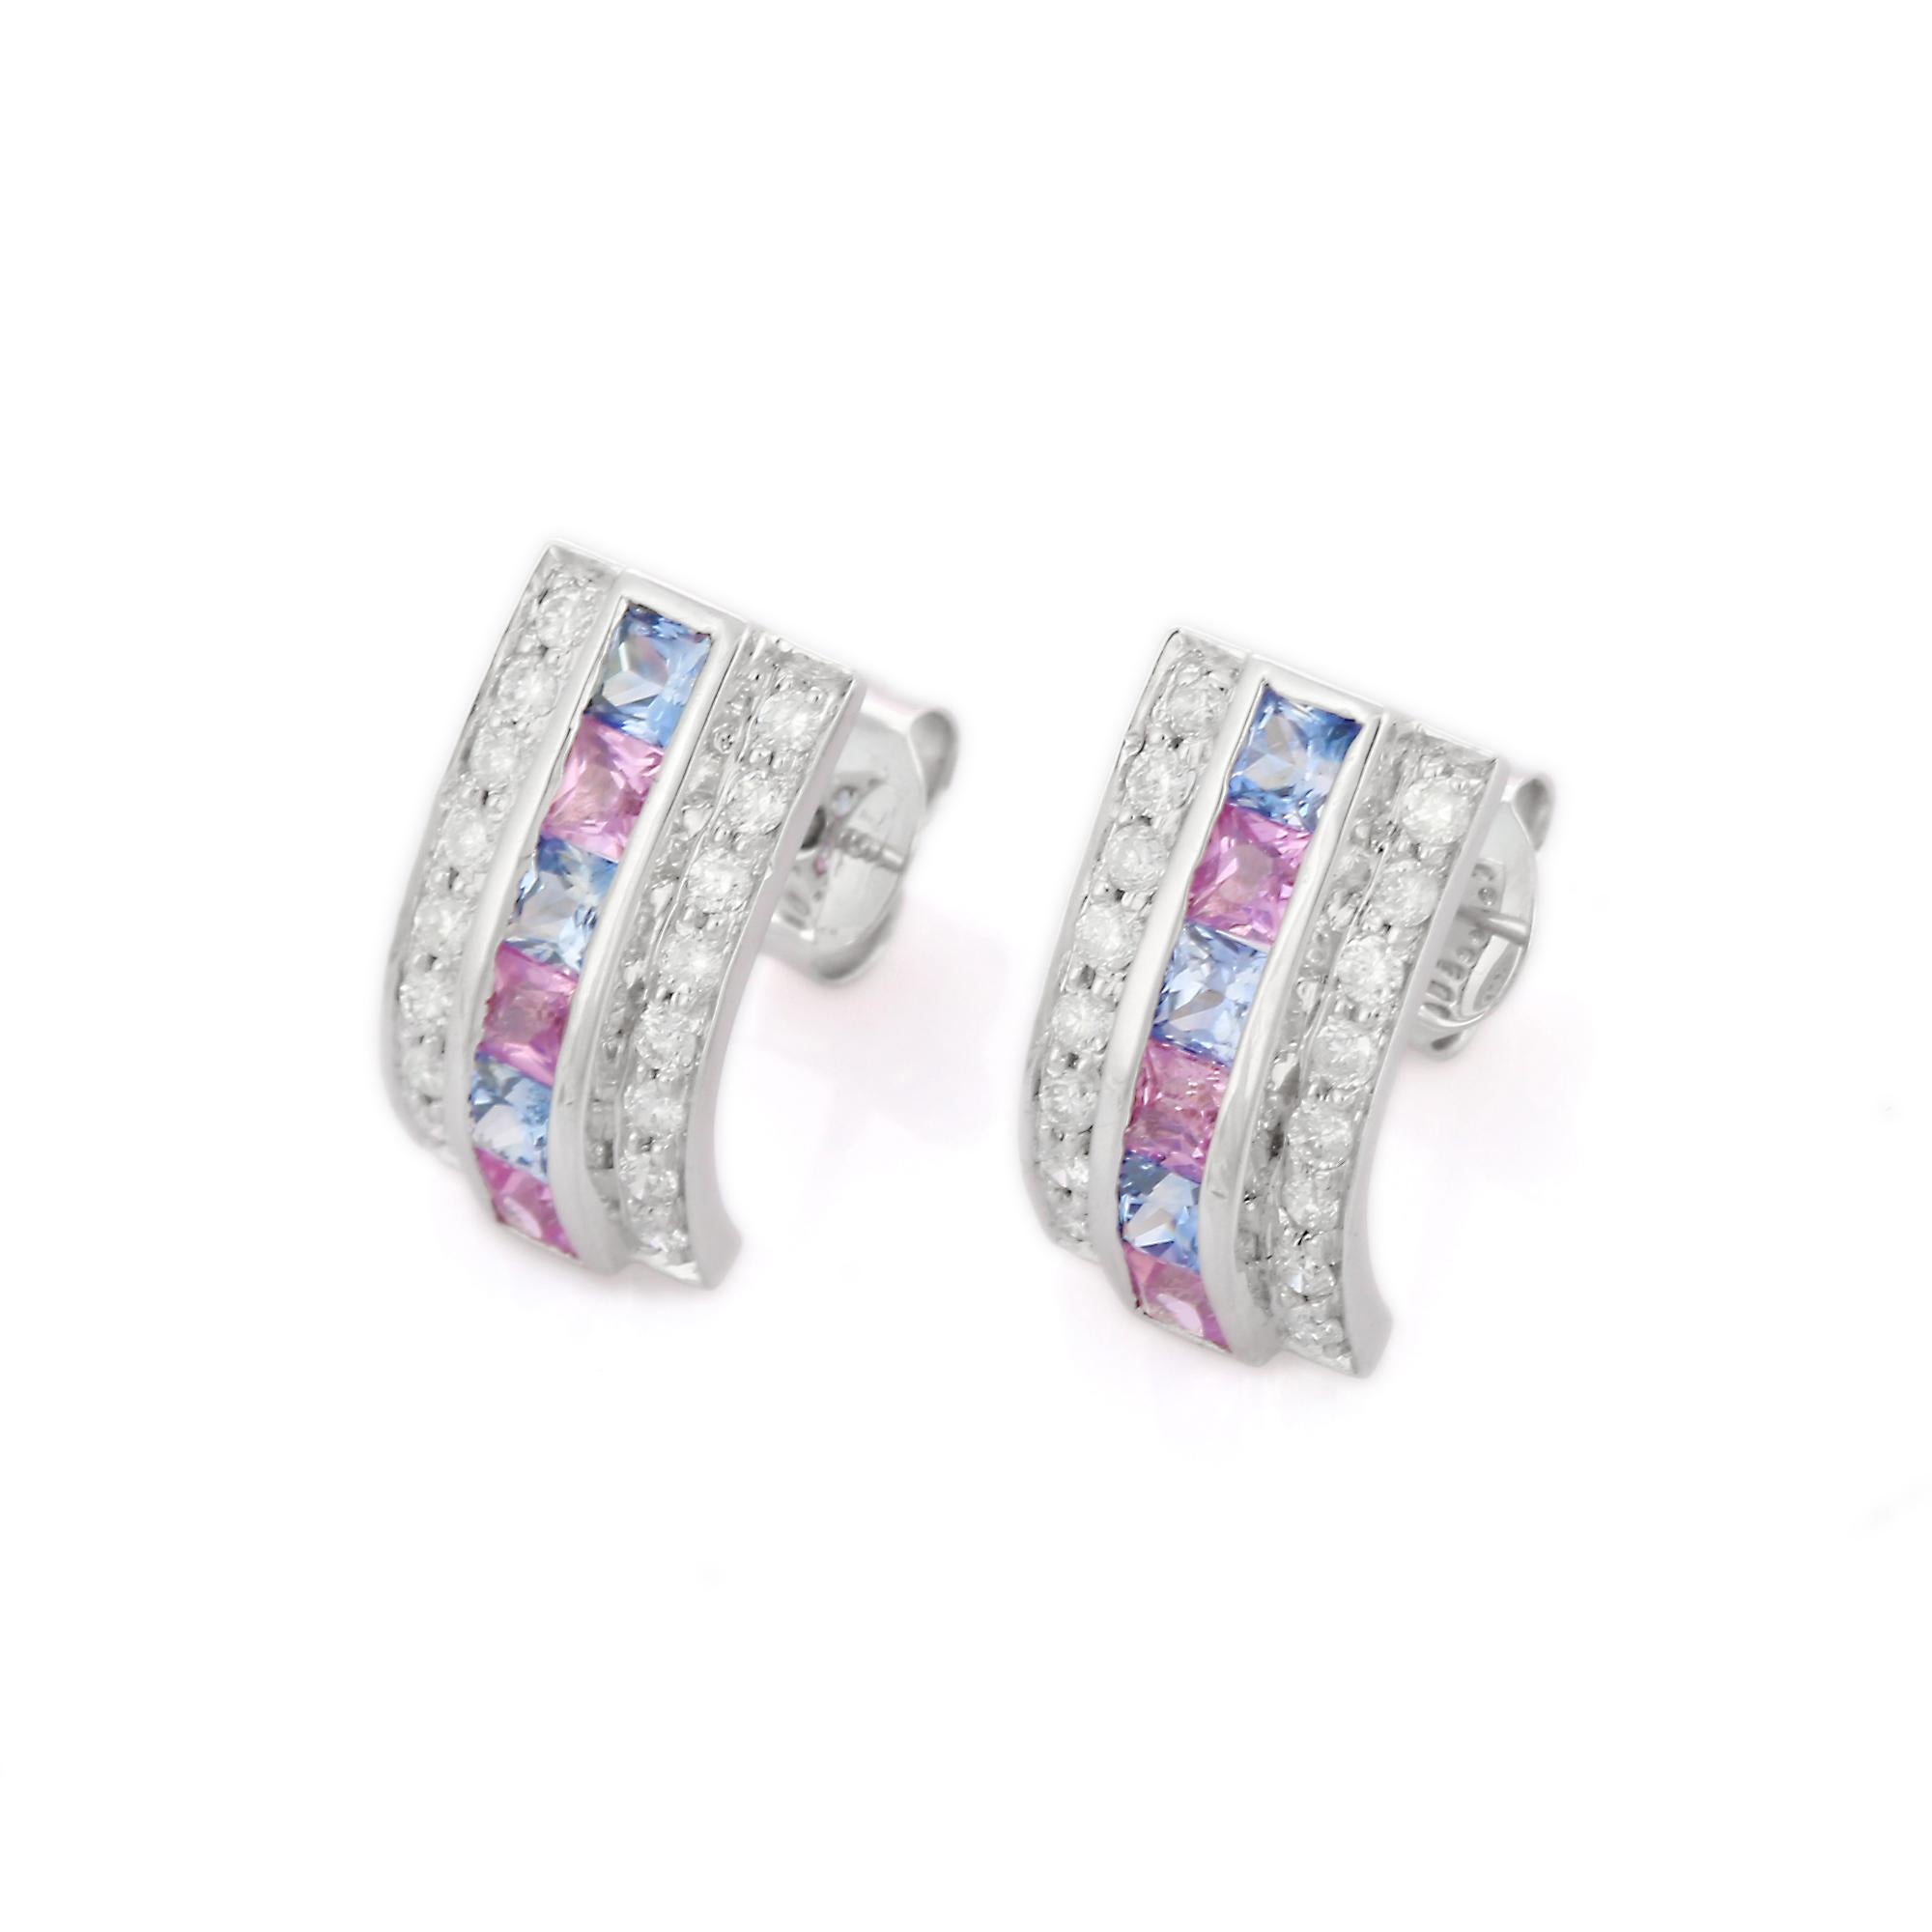 Studs create a subtle beauty while showcasing the colors of the natural precious gemstones and illuminating diamonds making a statement.

Square cut multi sapphire studs with diamonds in 18K gold. Embrace your look with these stunning pair of